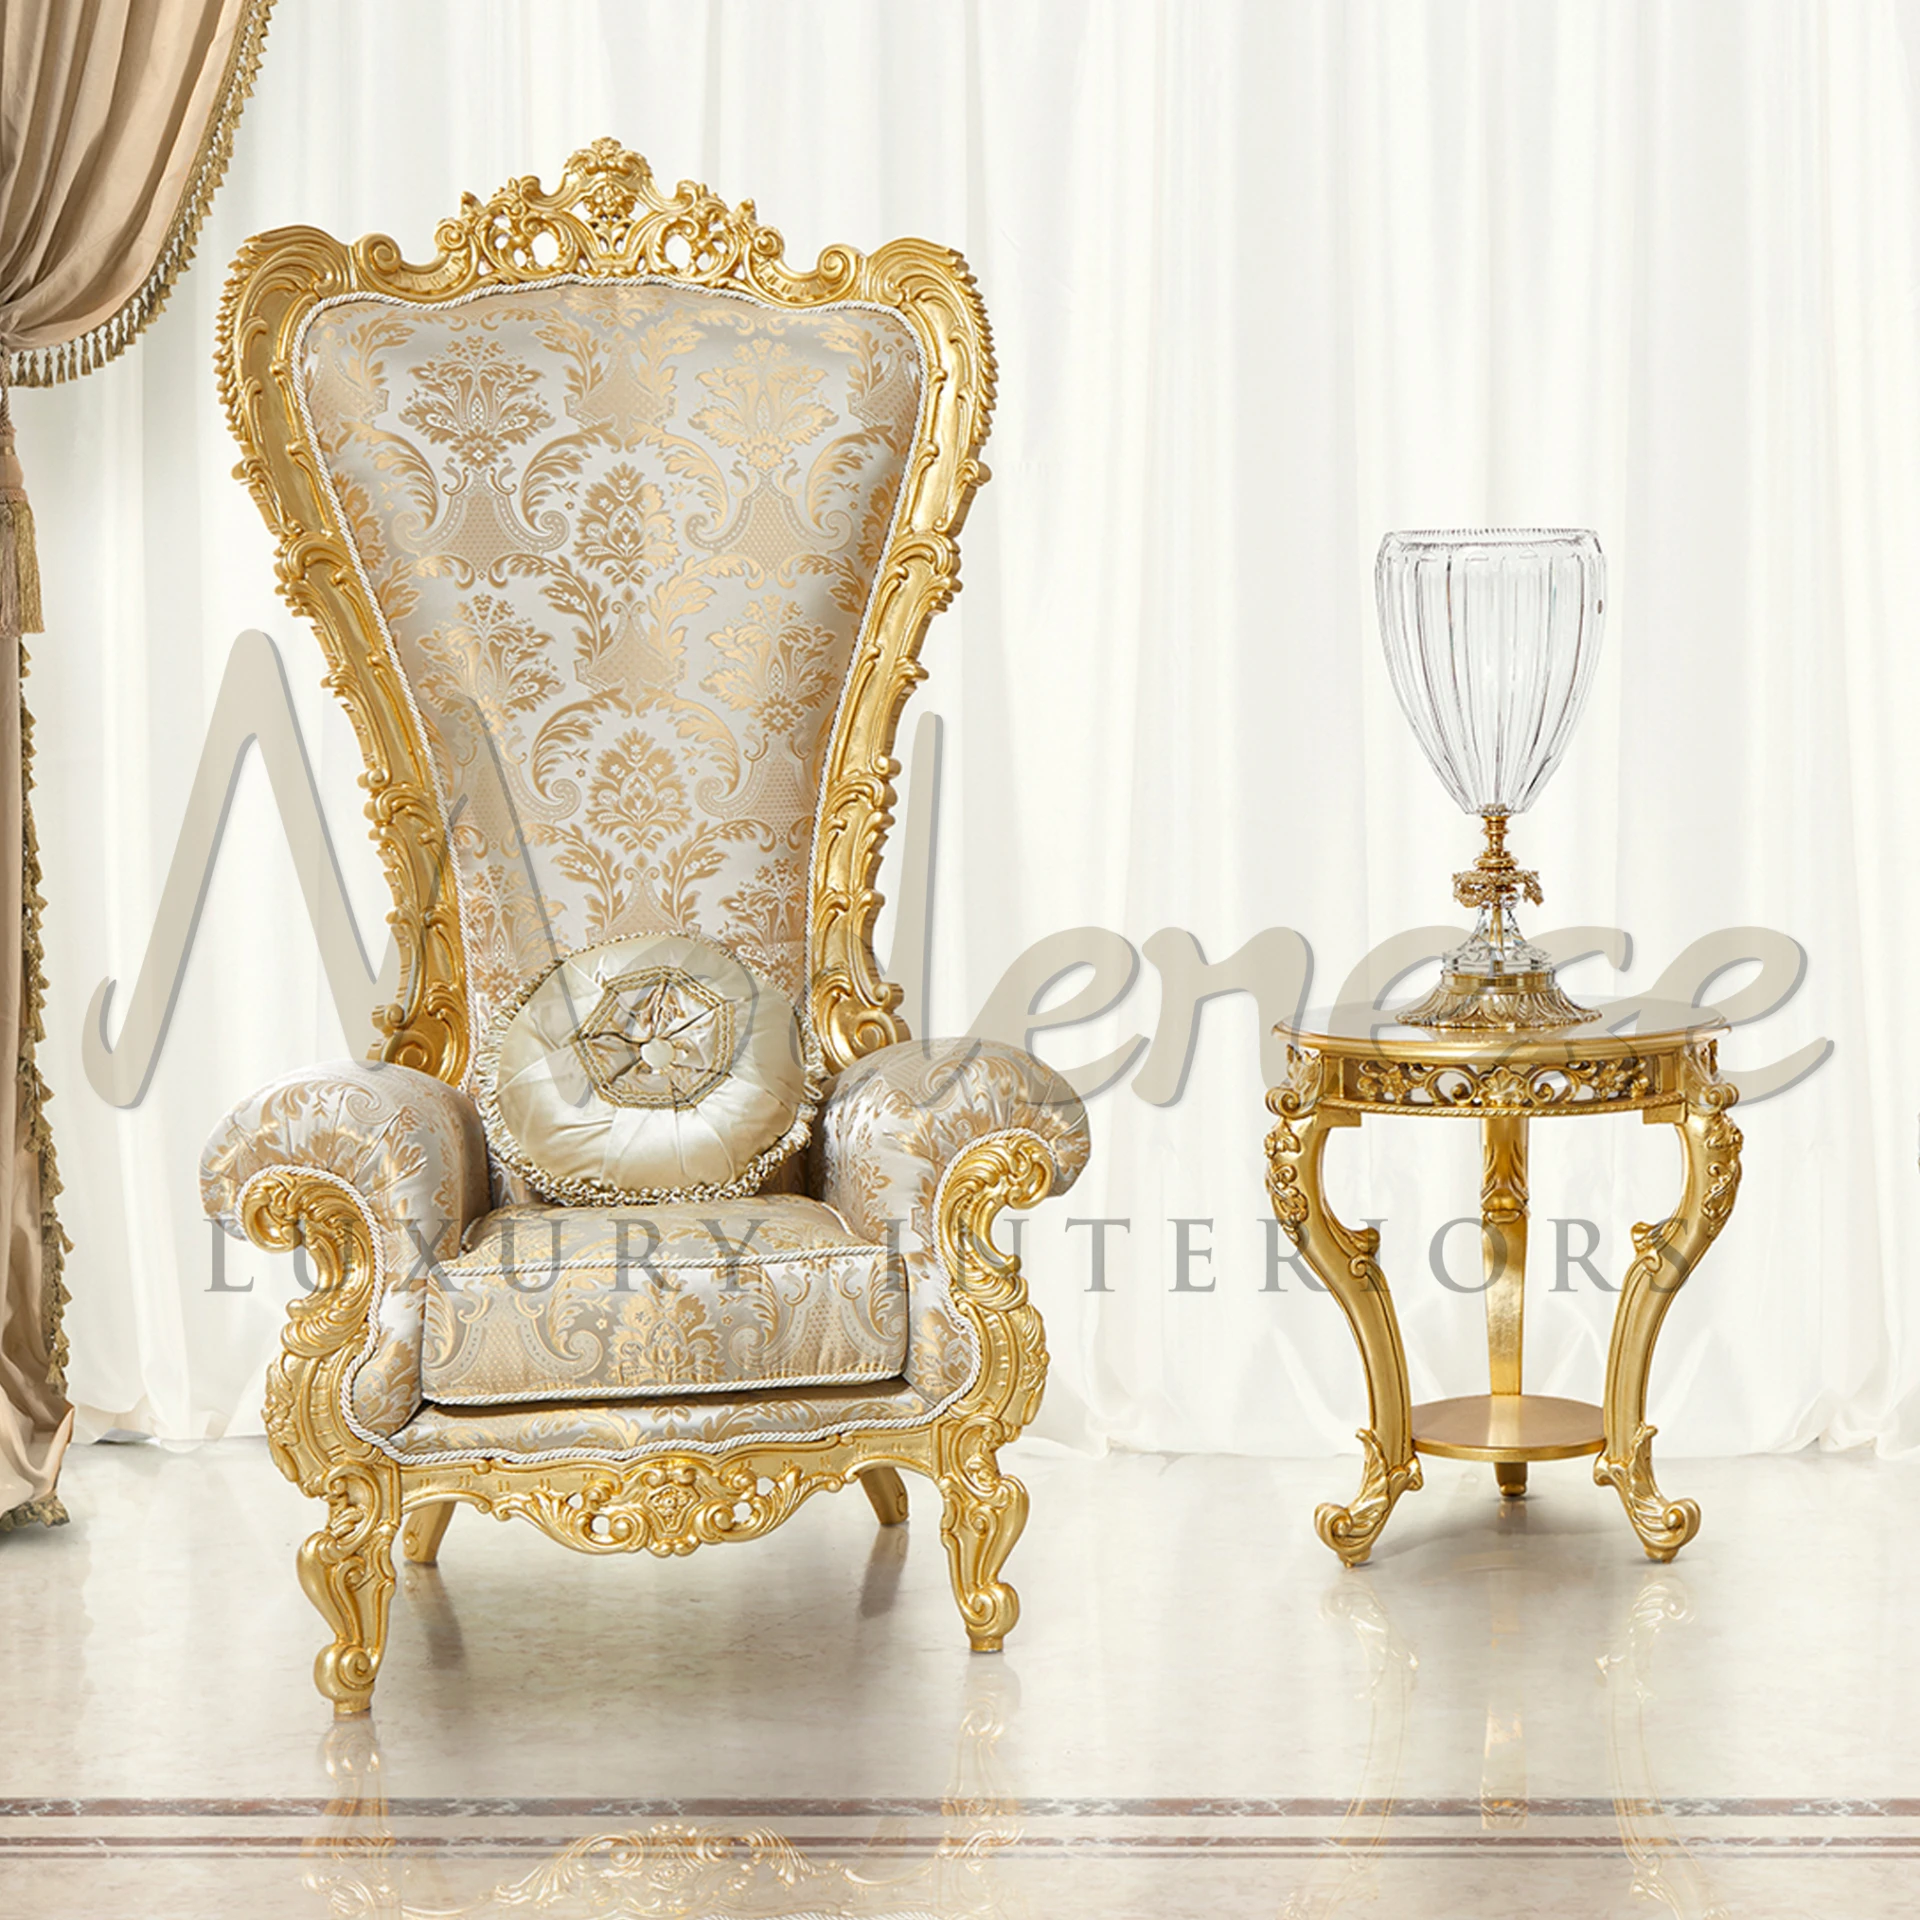 Handcrafted Royal Throne with new decorations and elegant finishes, created by skilled artists for a majestic interior design.
